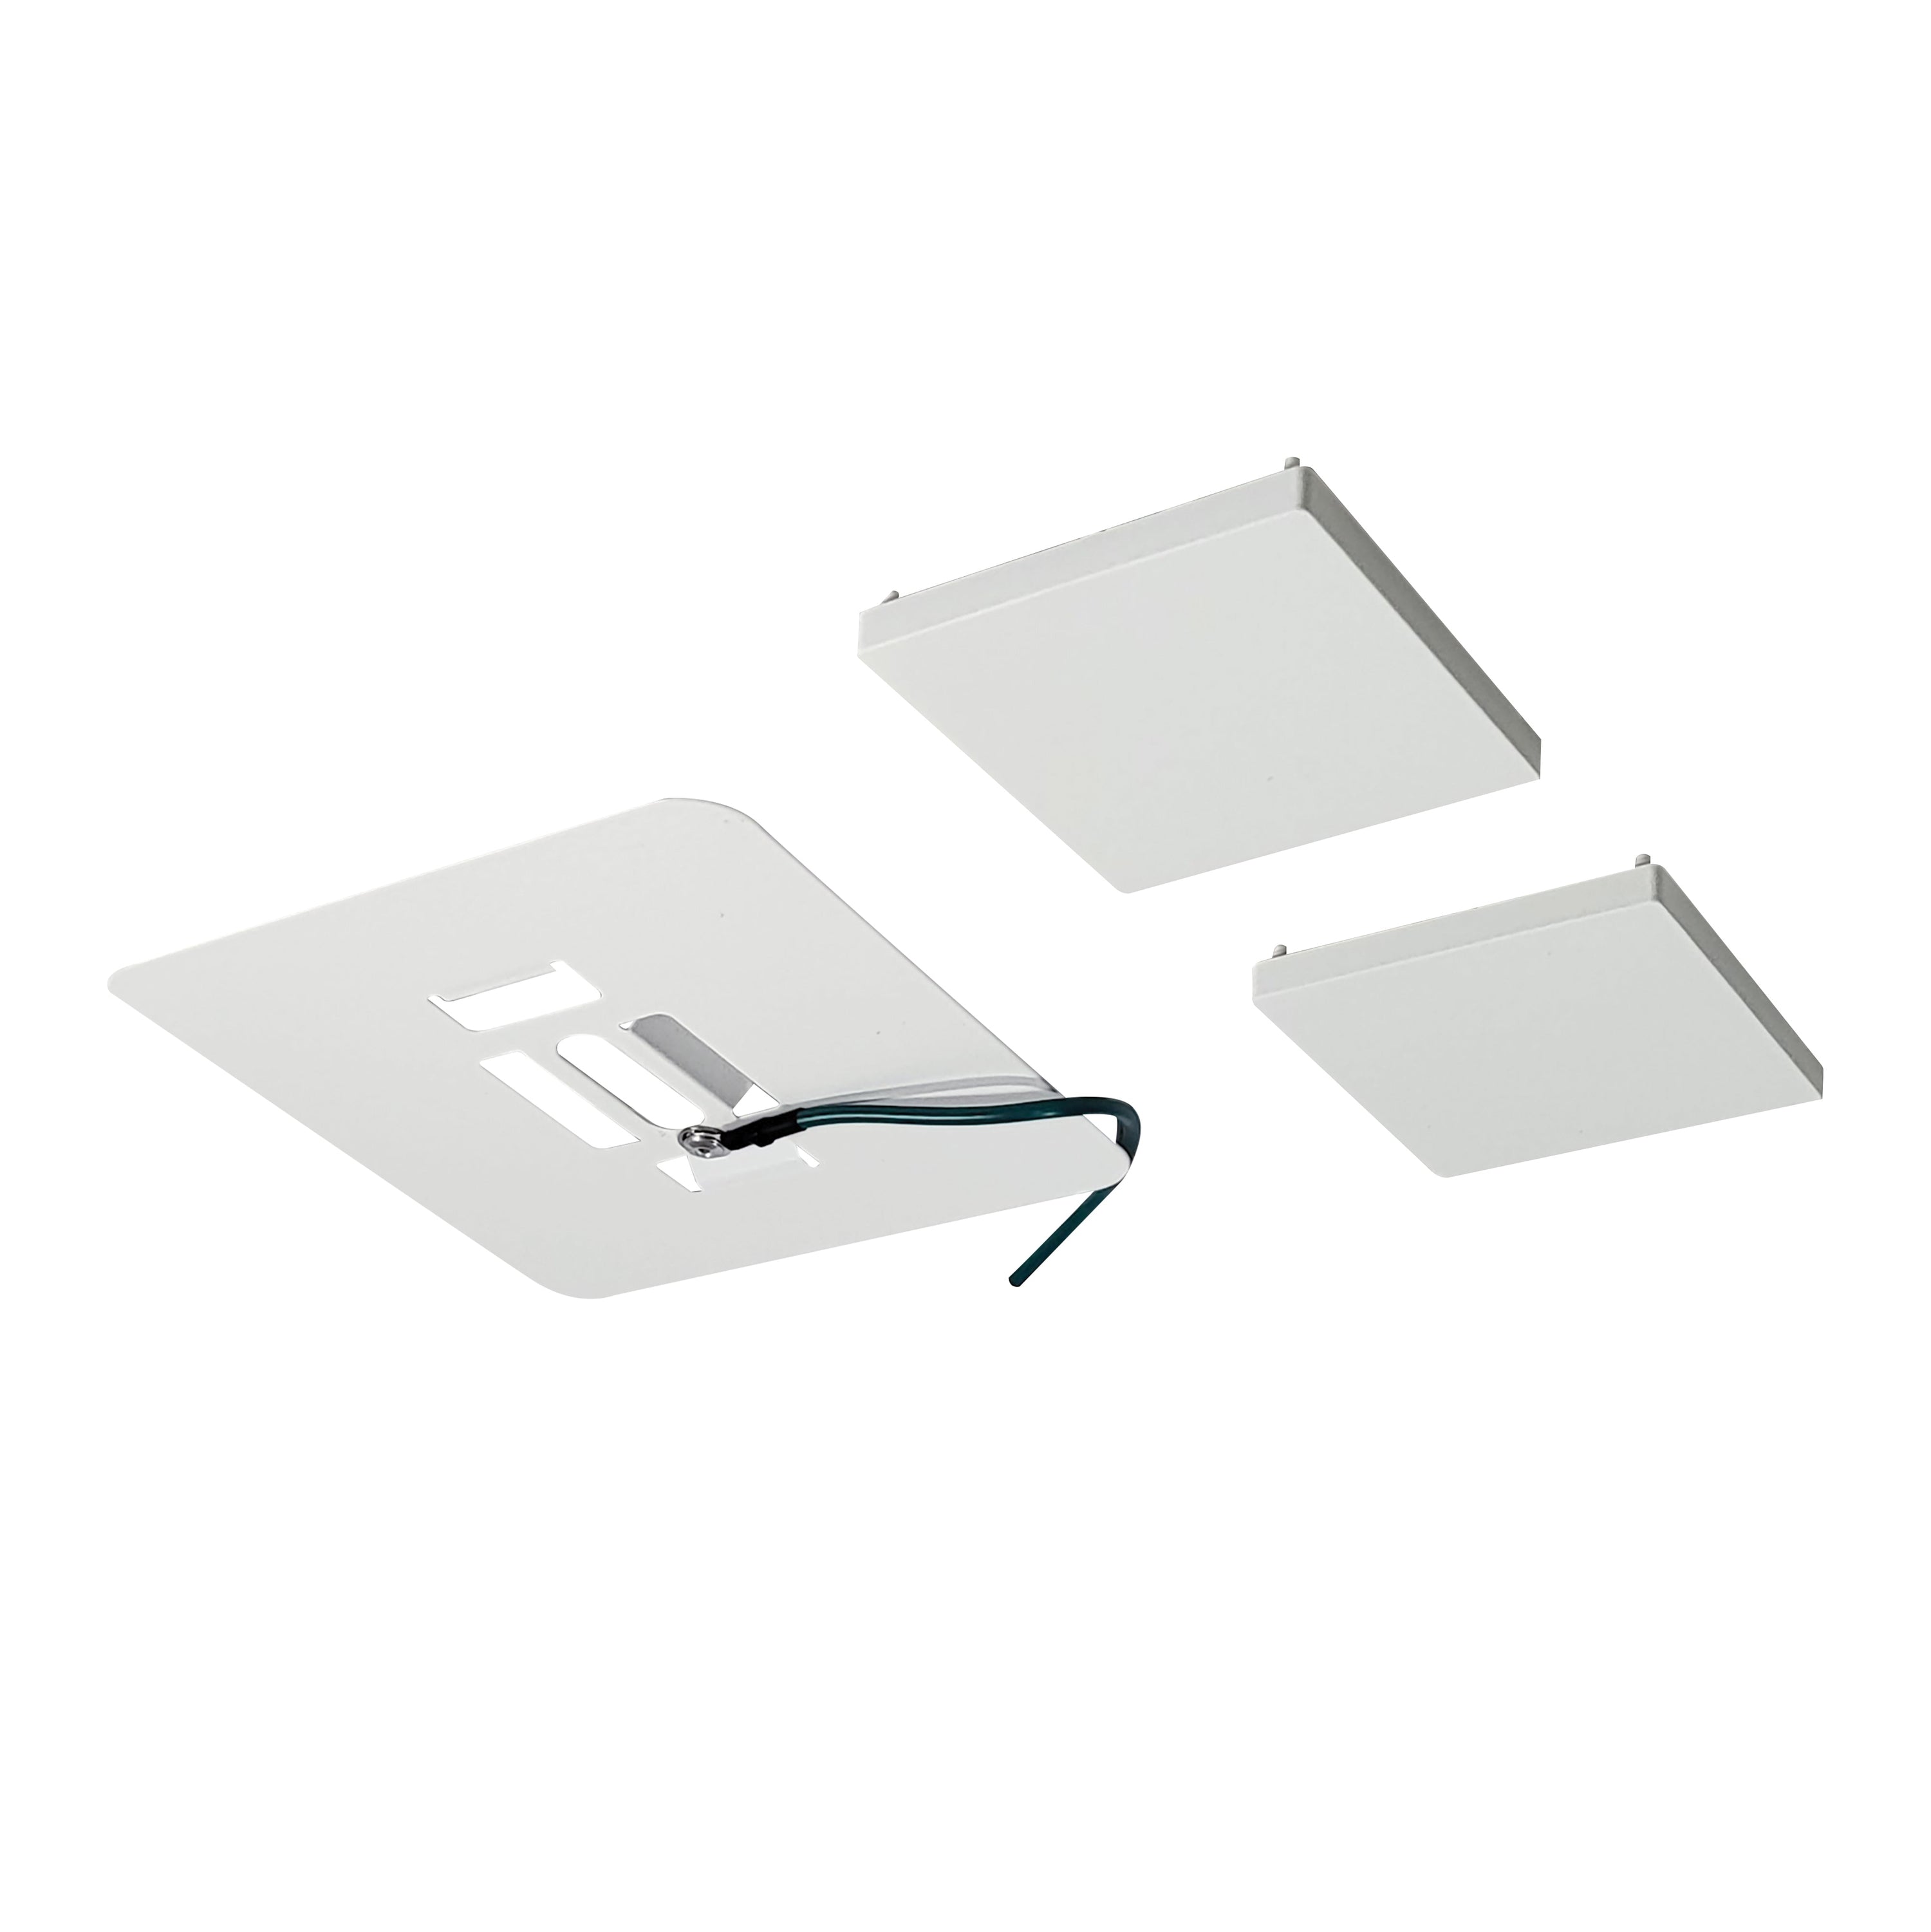 Nora Lighting NLIN-JBCW - Linear - Surface Mount Kit for L-Line Direct Series, White Finish with White End Caps